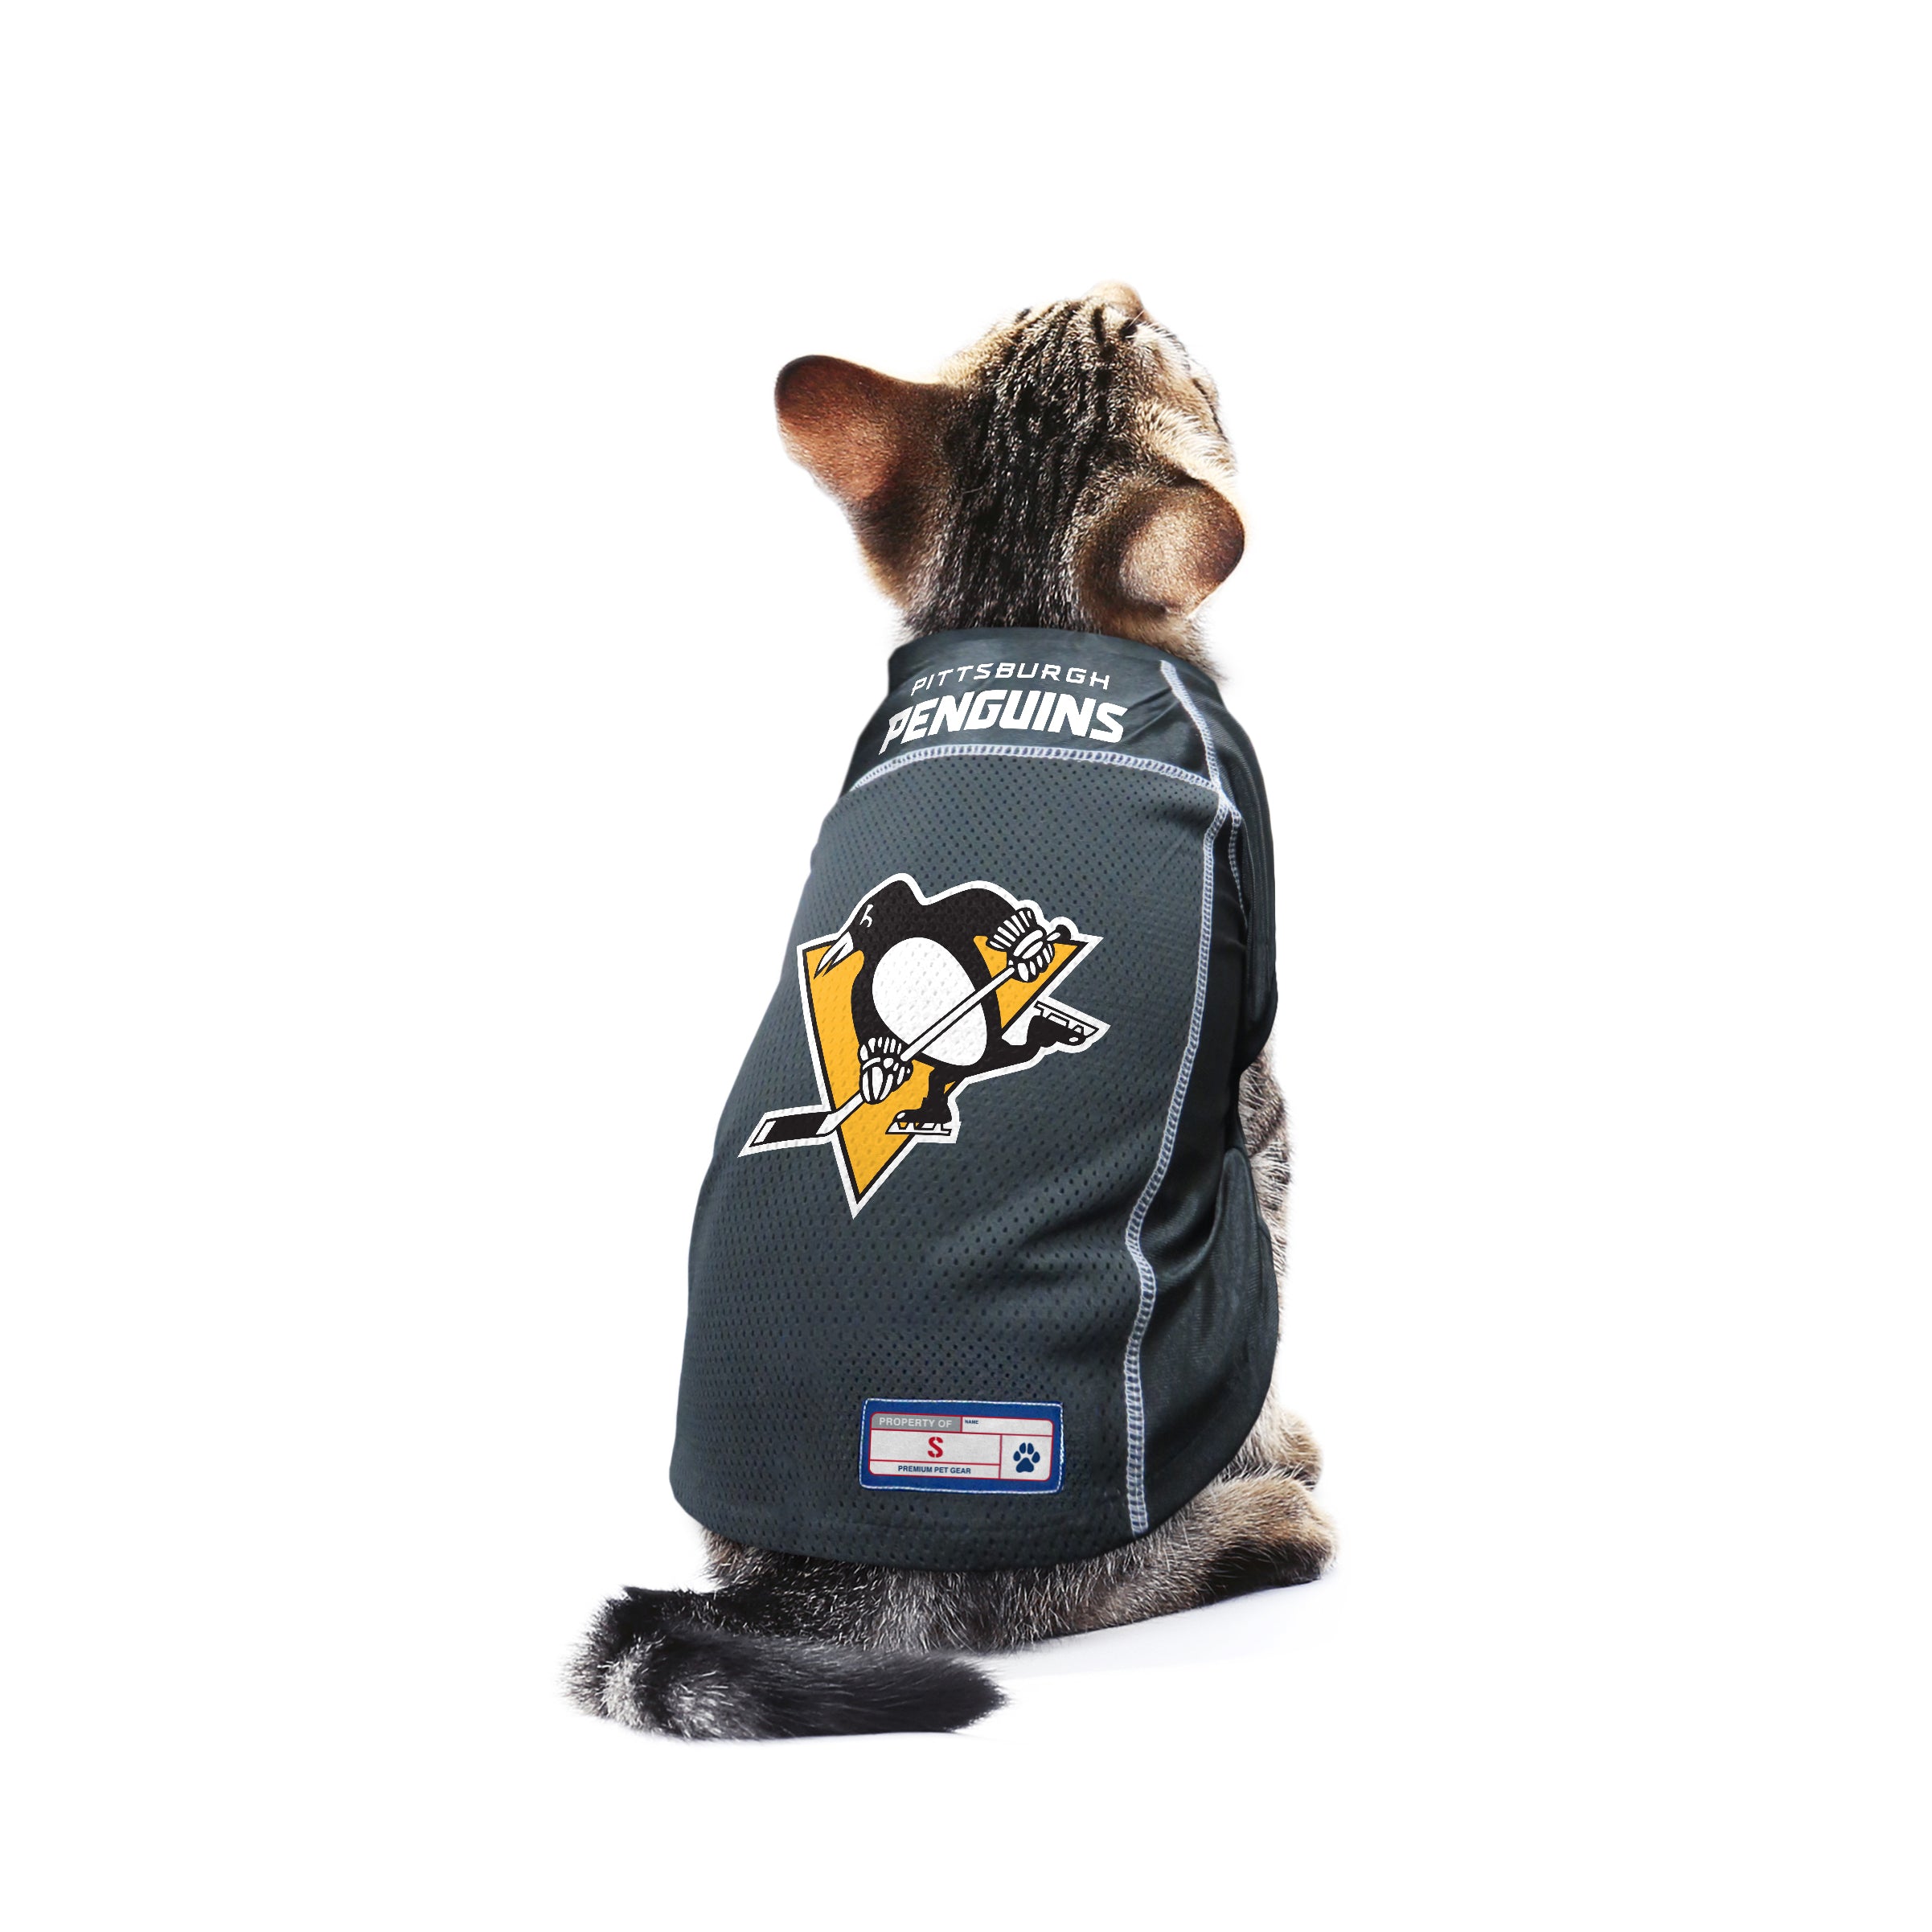 Pittsburgh Penguins Pet Jersey - Small